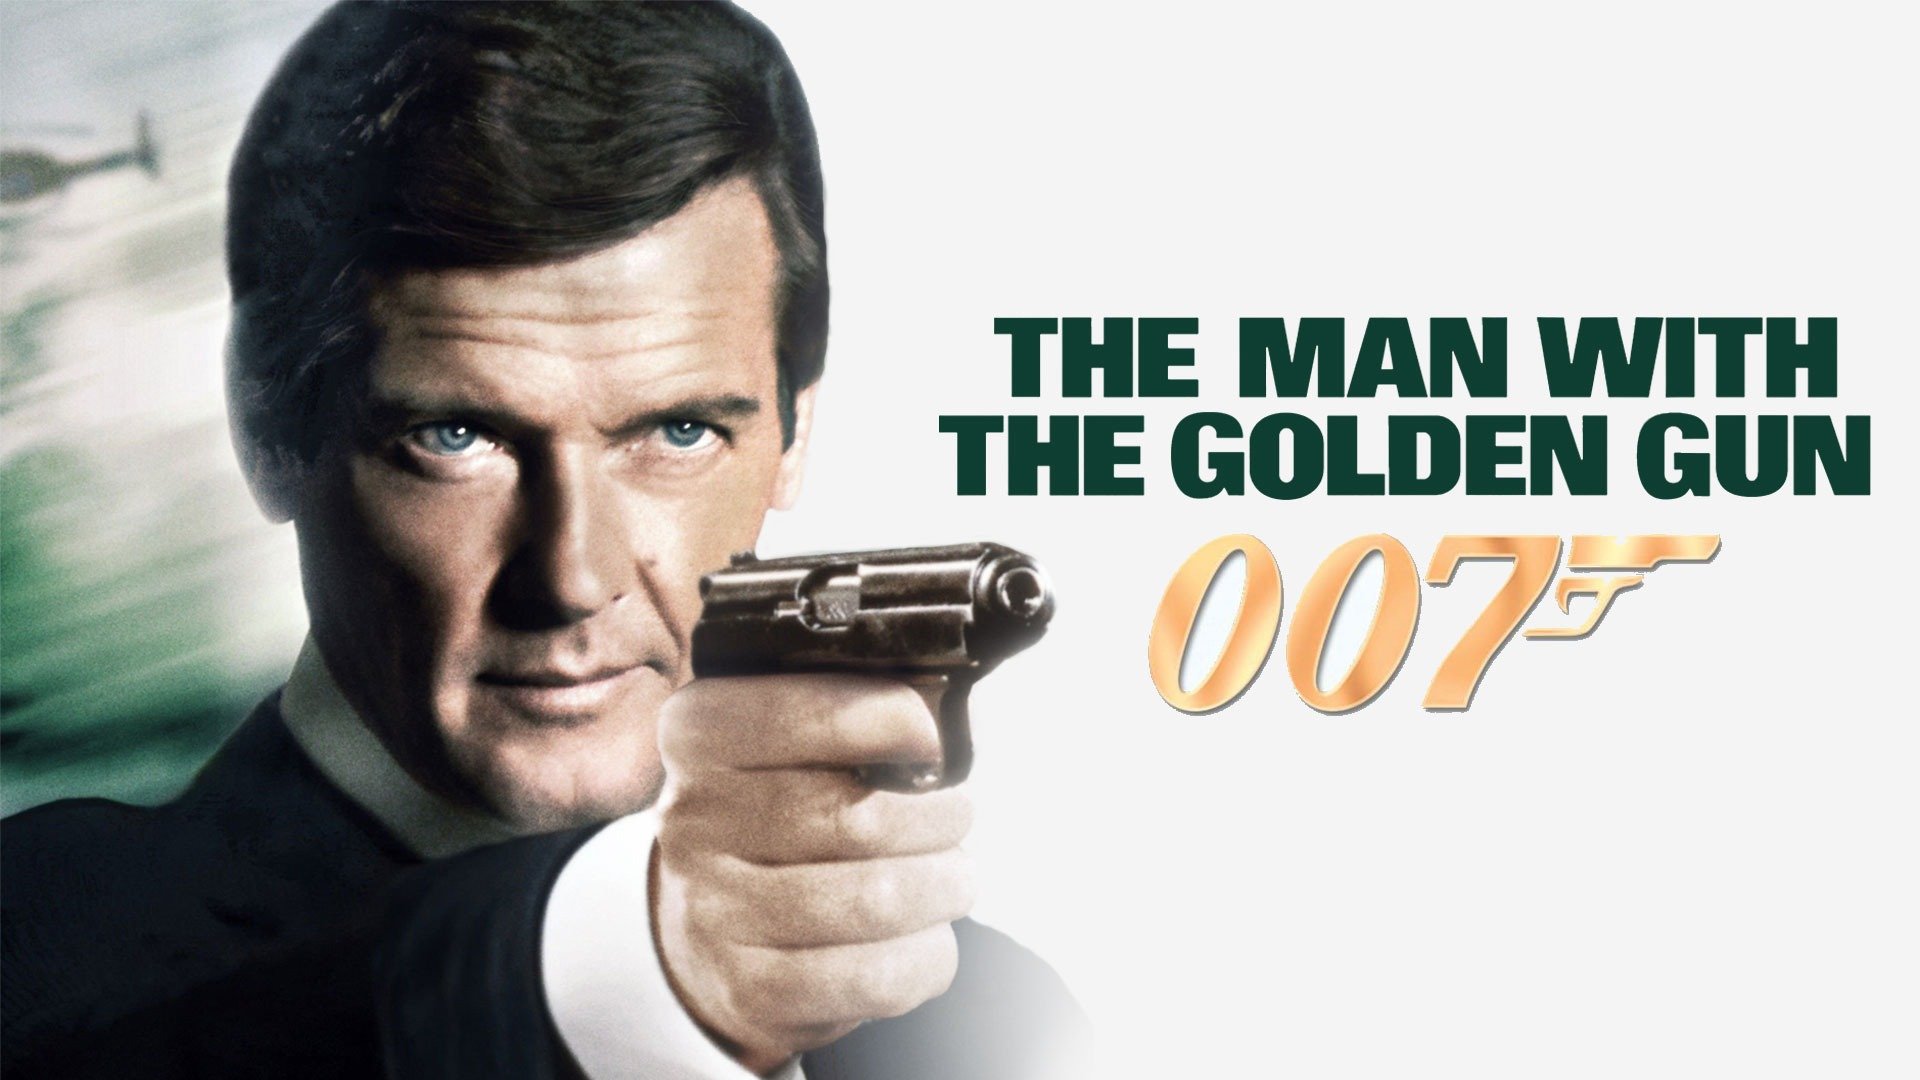 43 Facts about the movie The Man with the Golden Gun - Facts.net